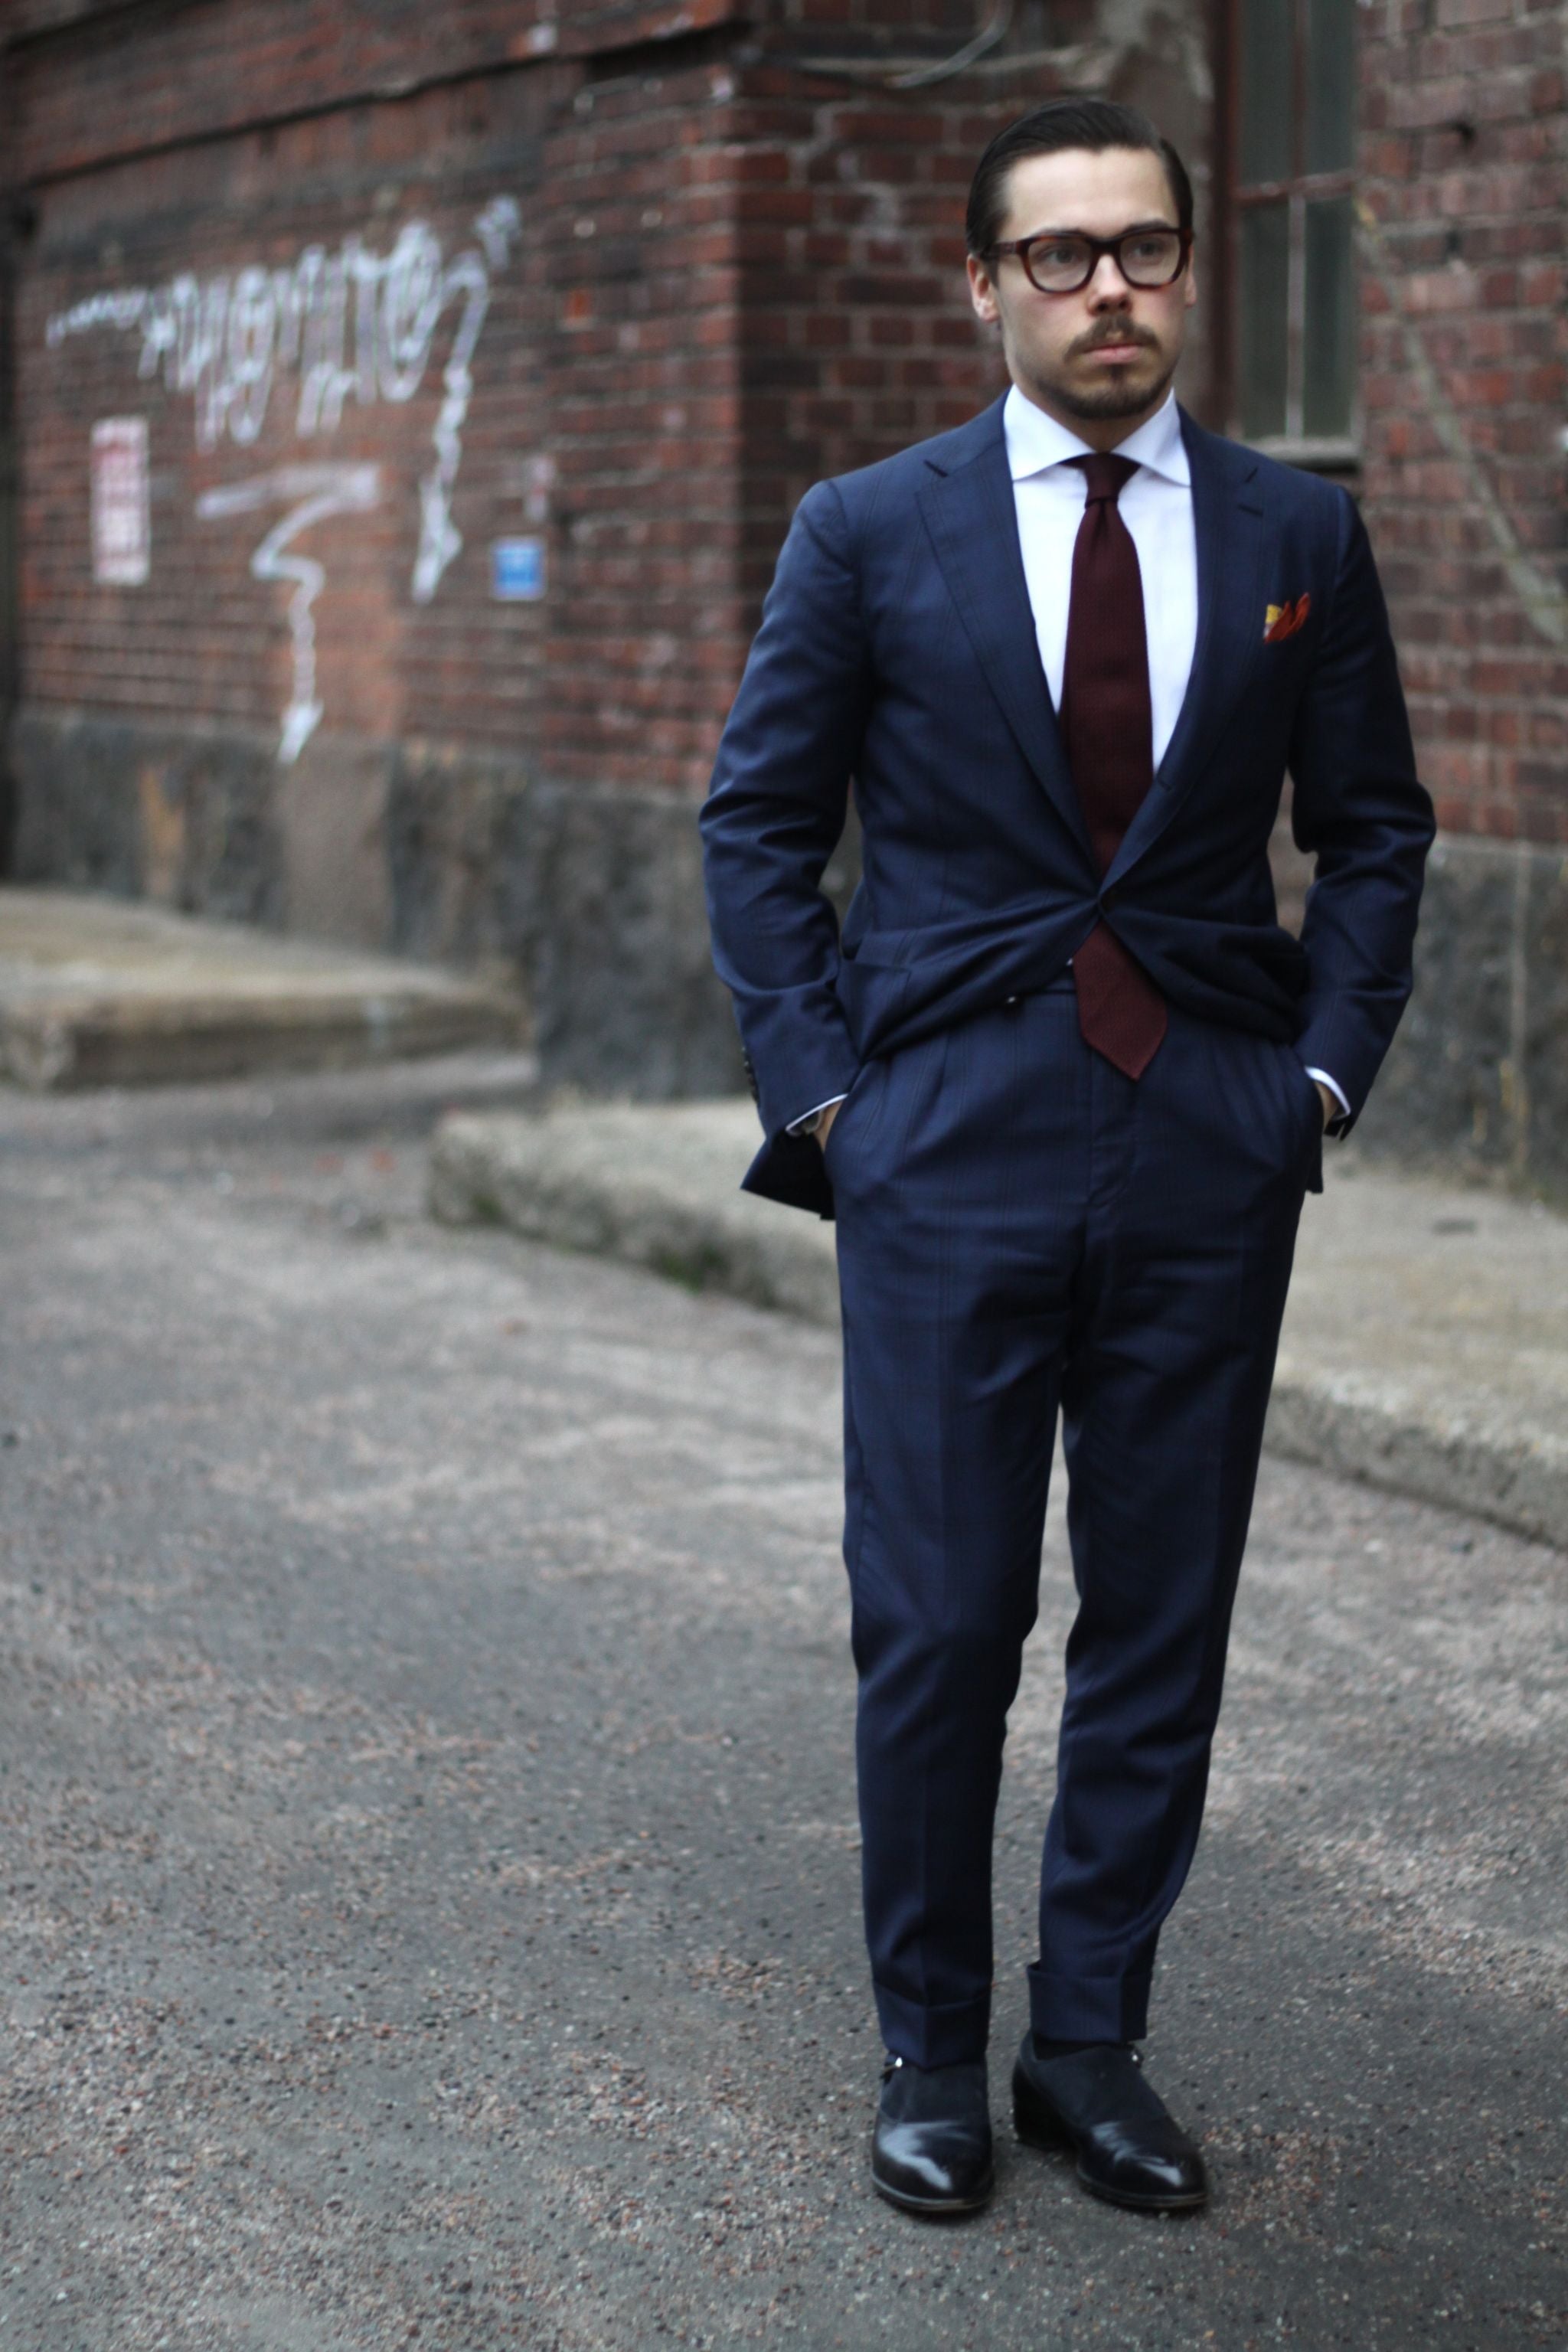 Dark blue suit with white shirt and burgundy tie is classic business attire.